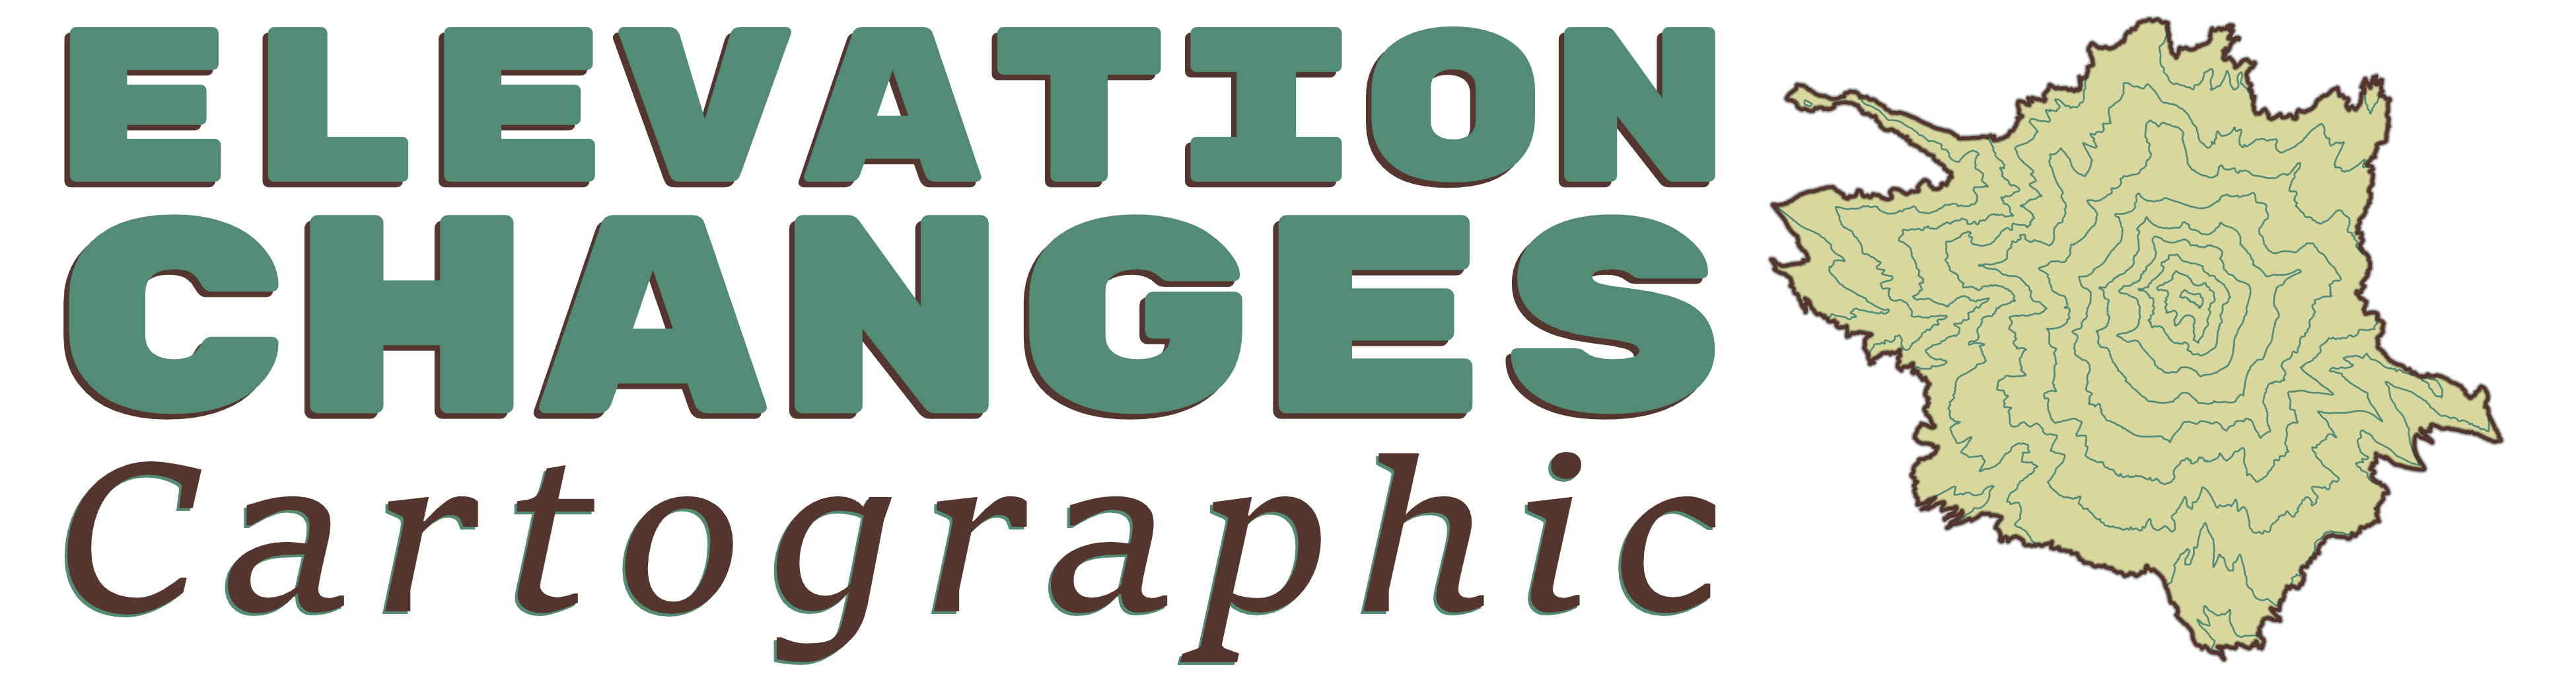 Elevation Changes Cartographic